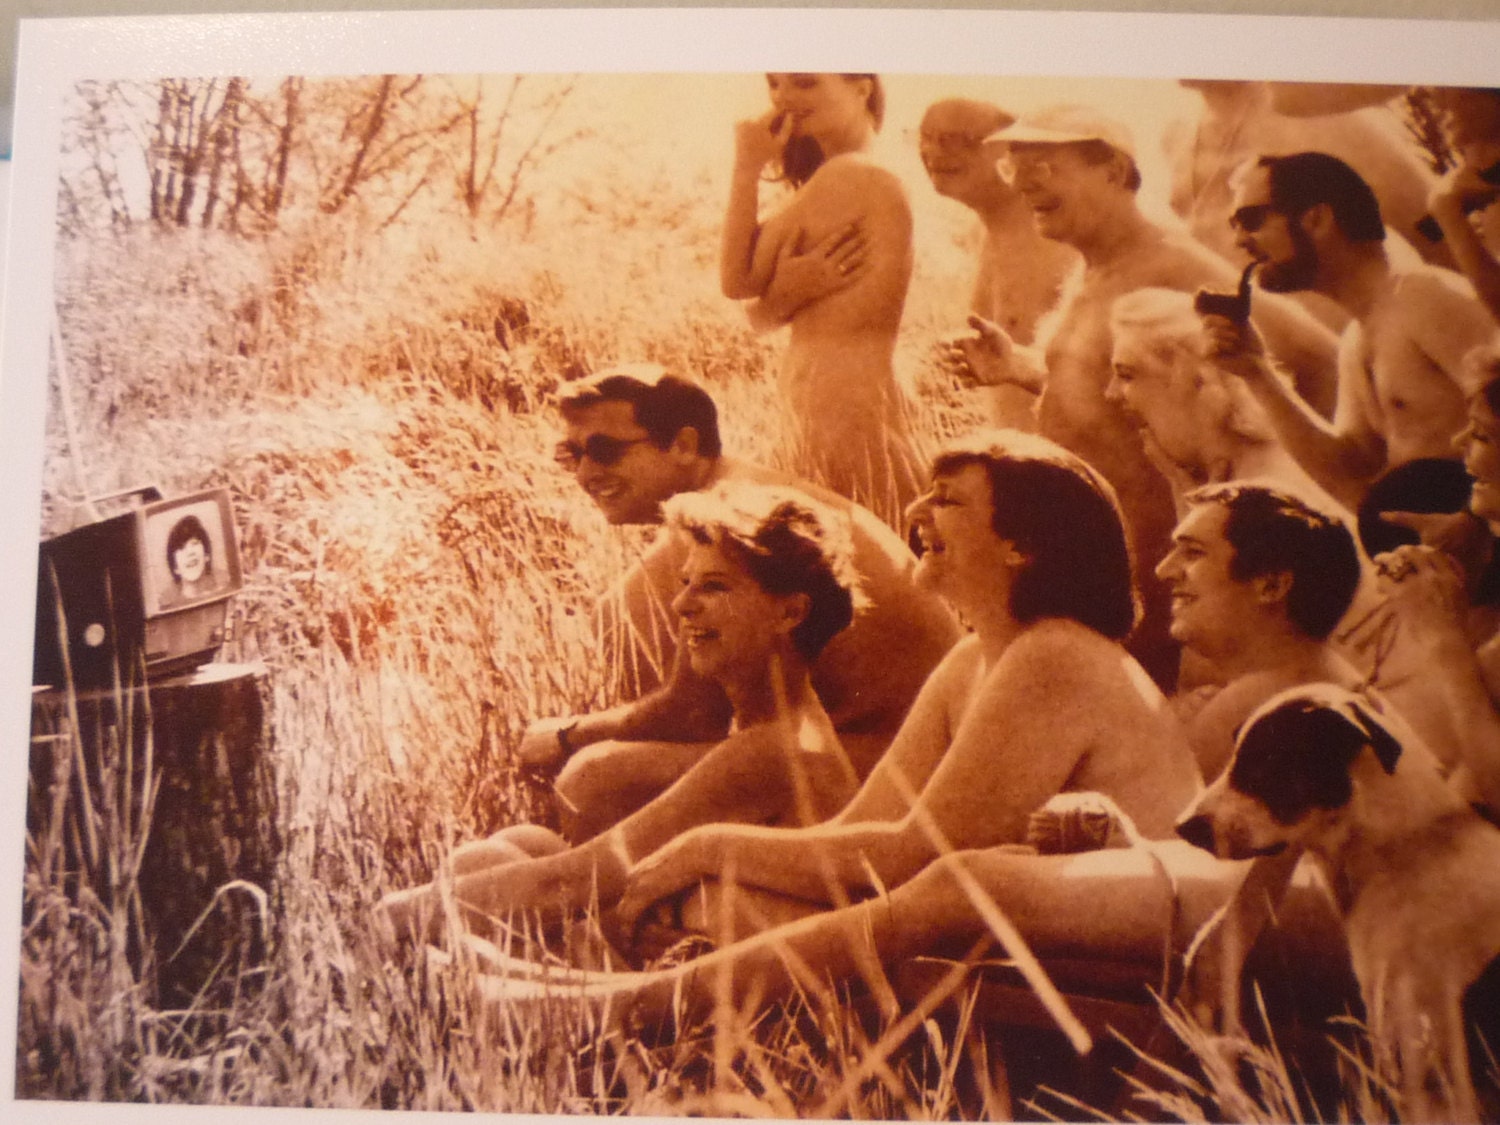 alicia tinker recommends vintage nudist photography pic